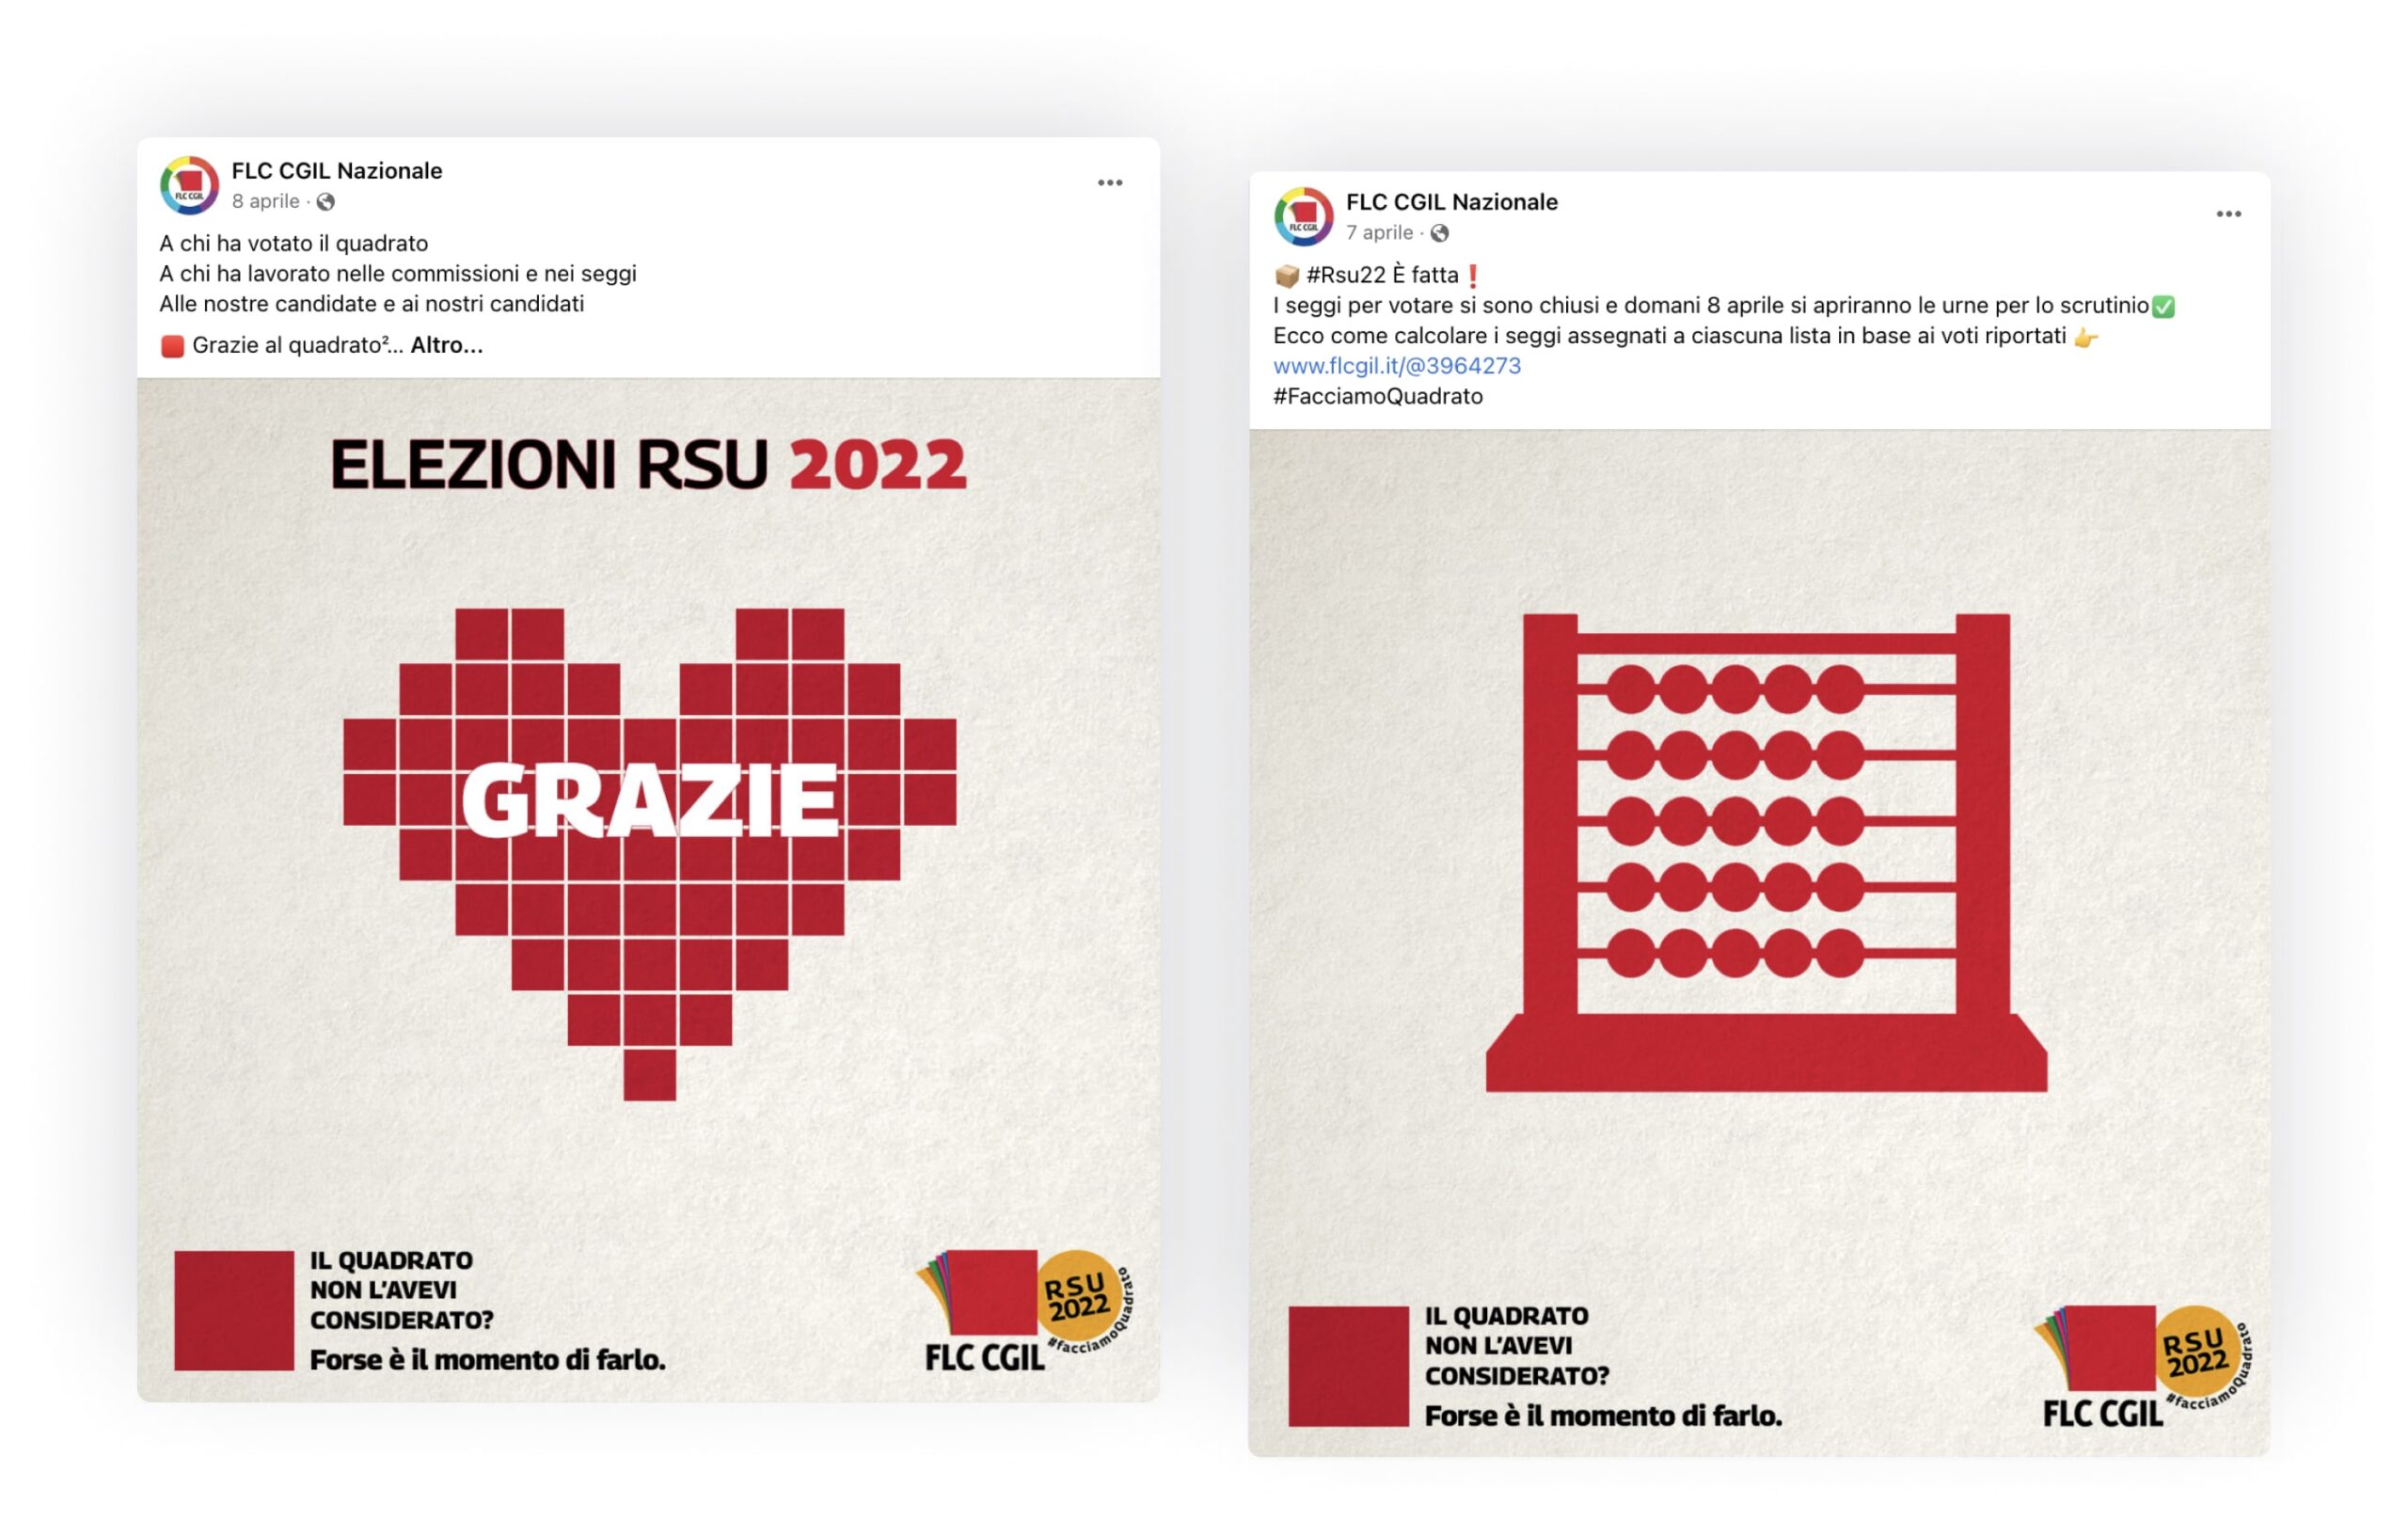 Two examples of card for the advertising for FLC CGIL